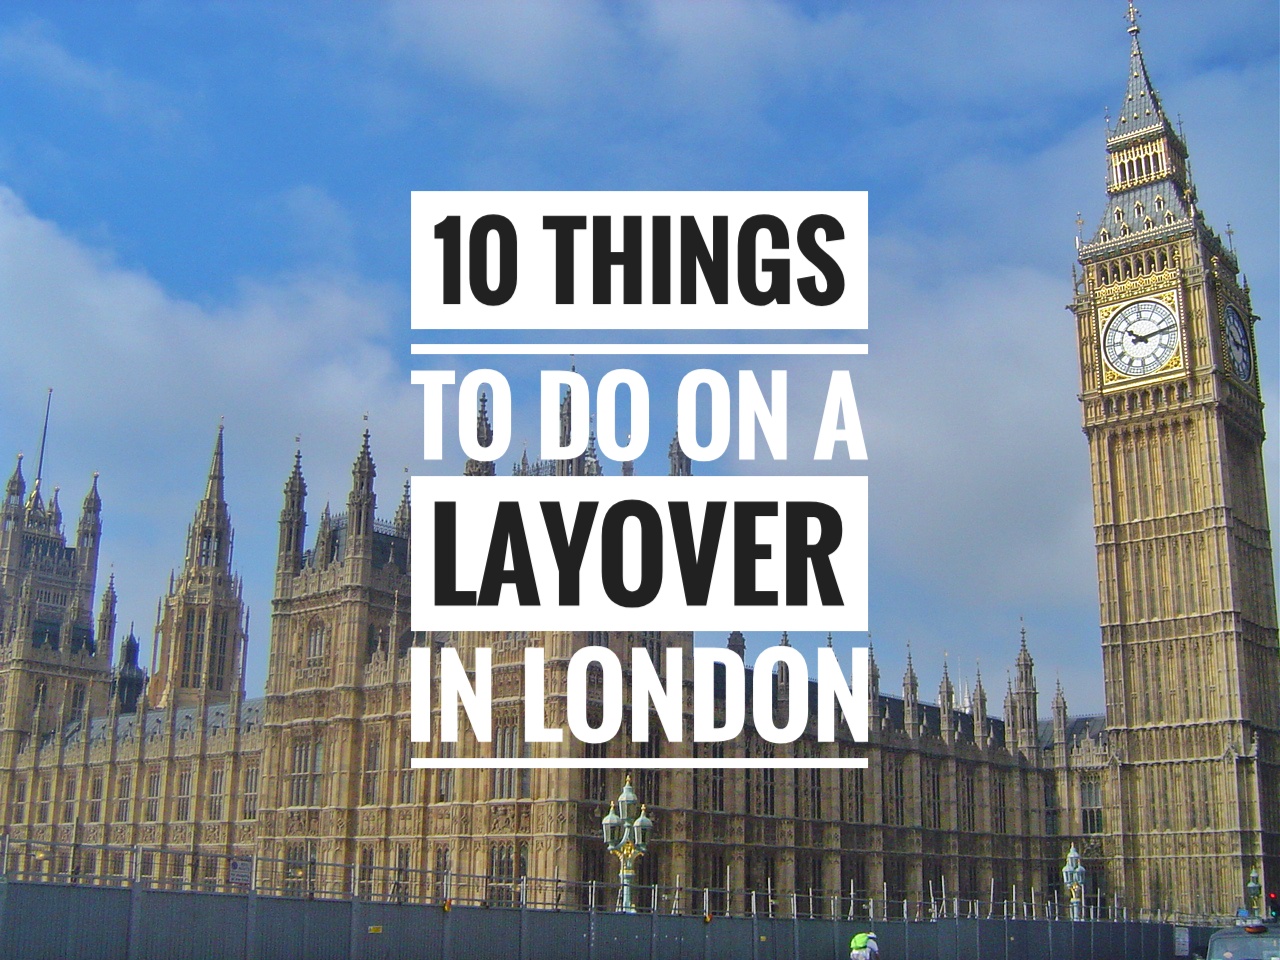 10 Things to do on a Layover in London!